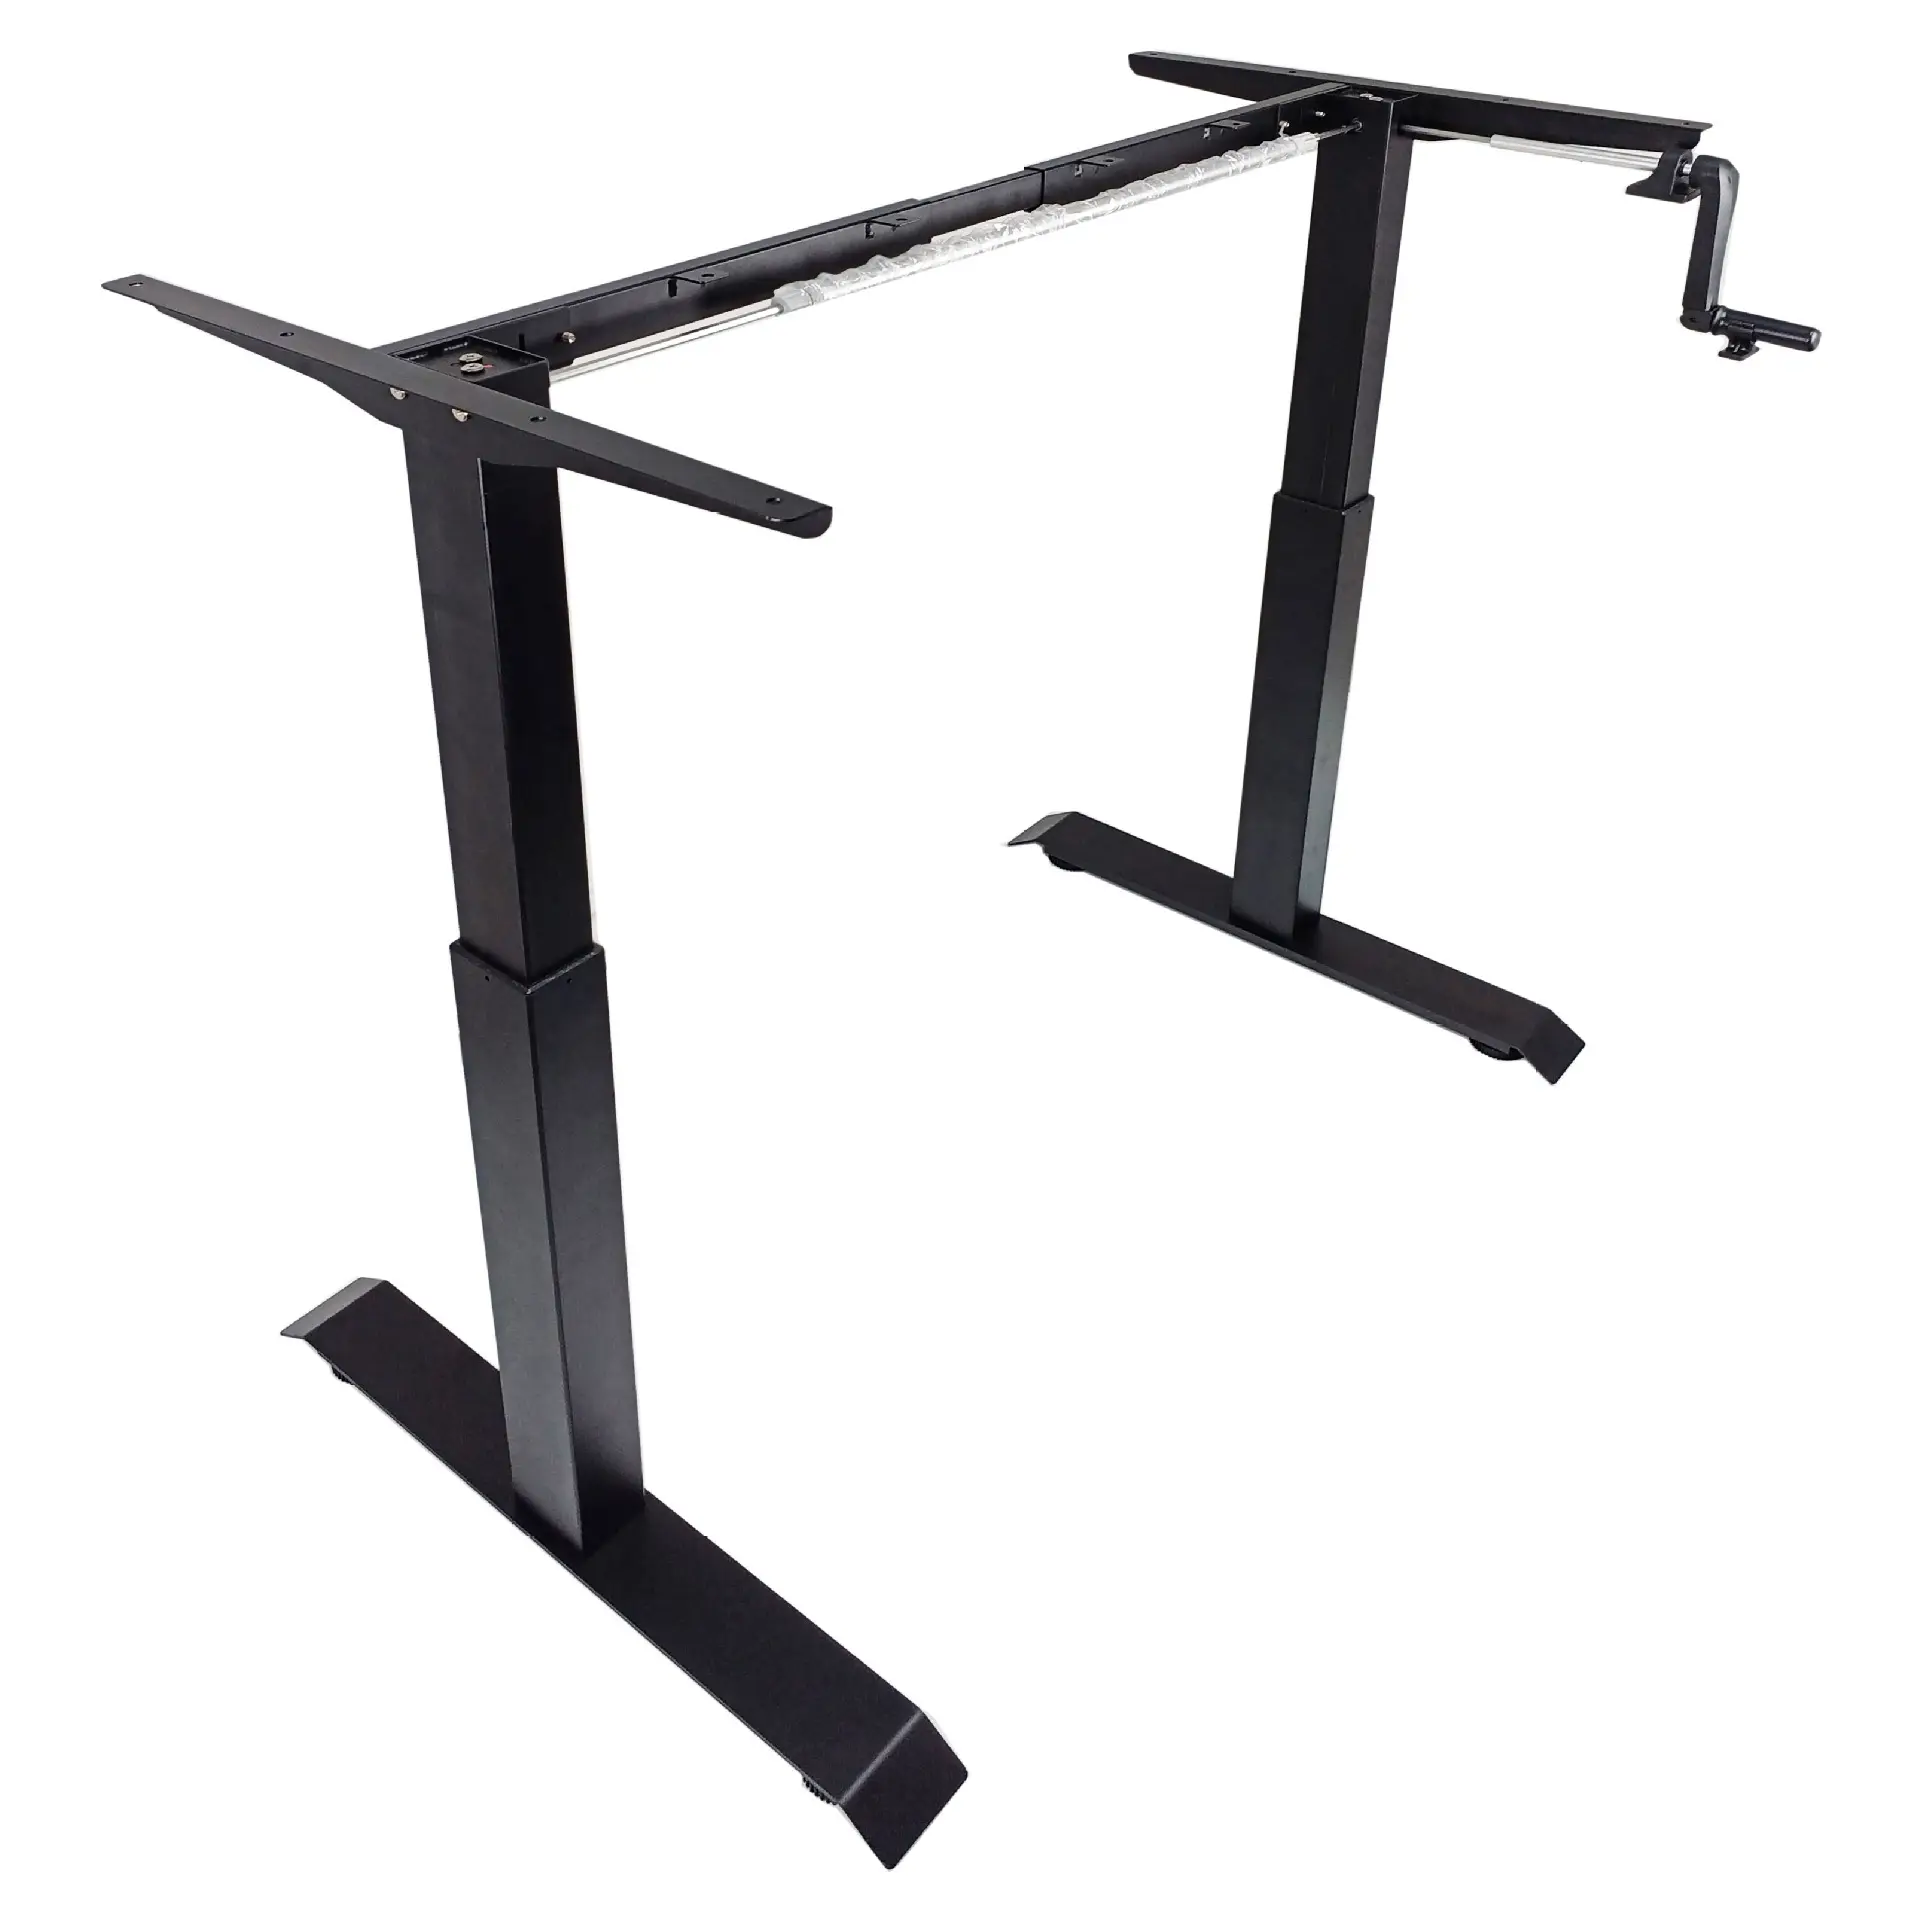 Used For Sit Stand Desk Hot Selling Two-Section Height Adjustment Manual Desk Frame